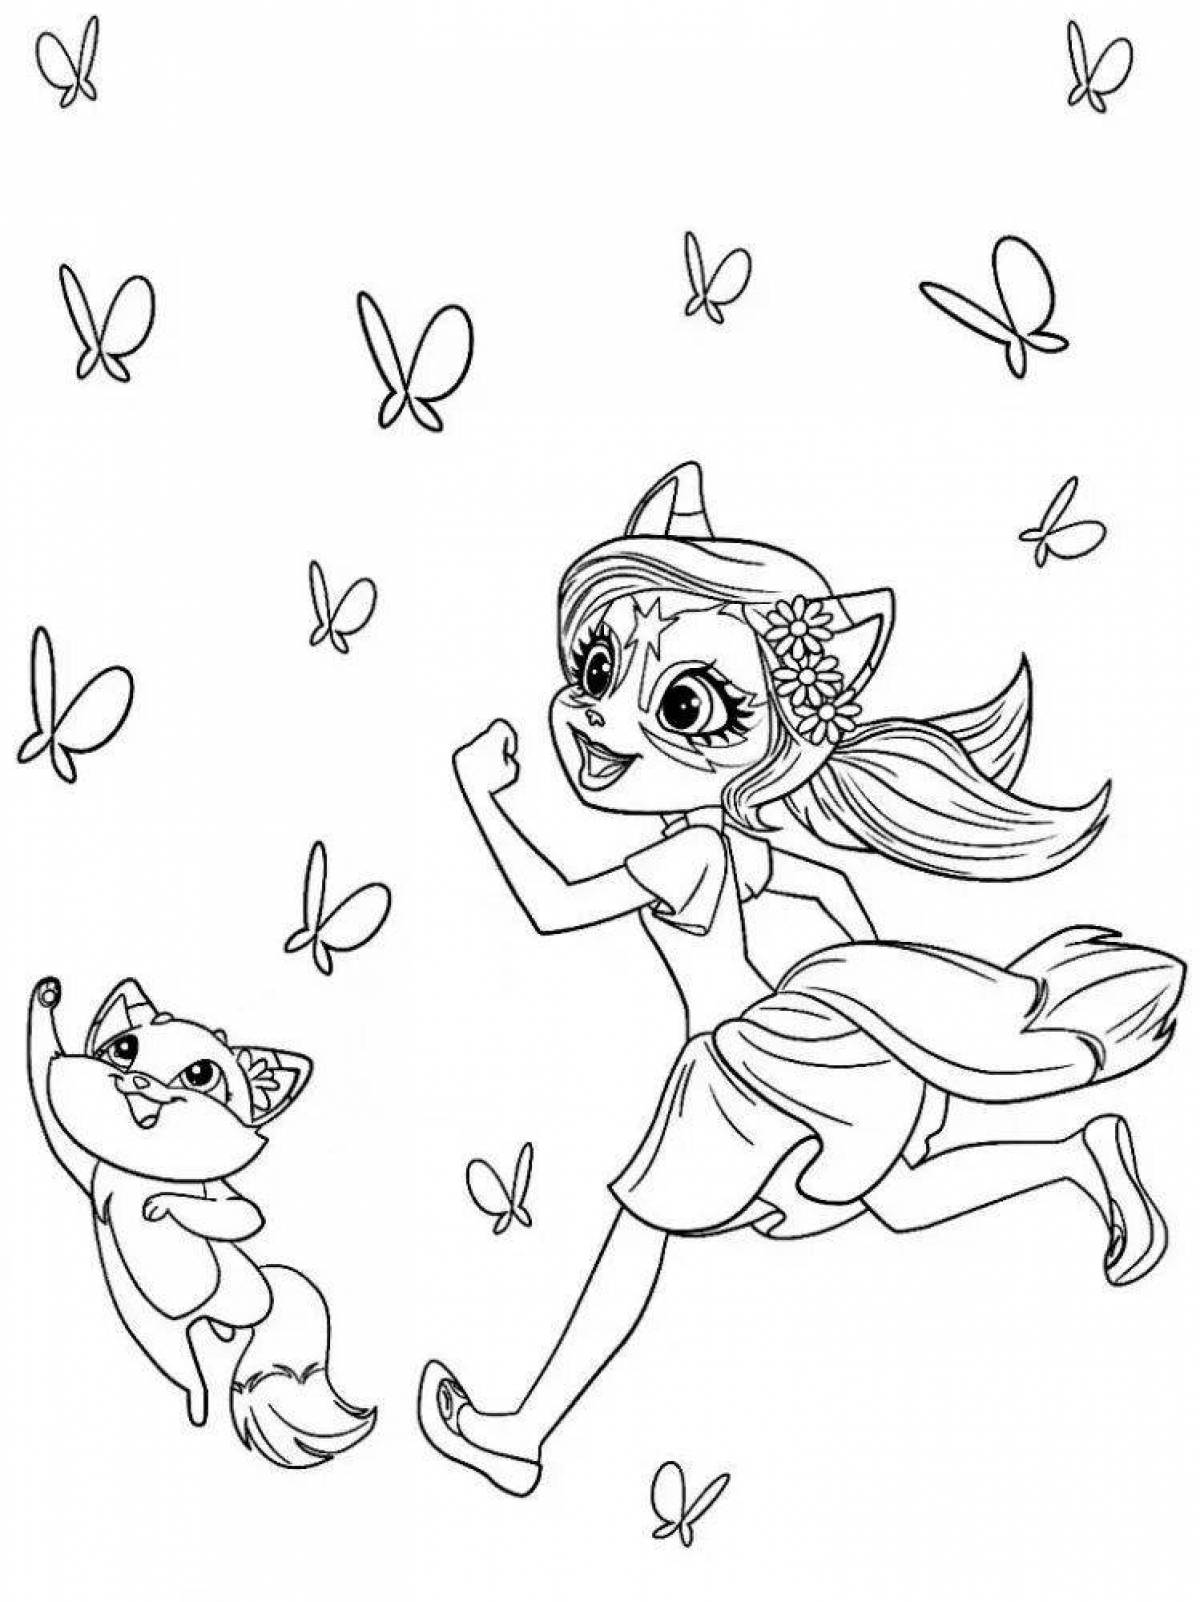 Delightful incantimuls coloring pages